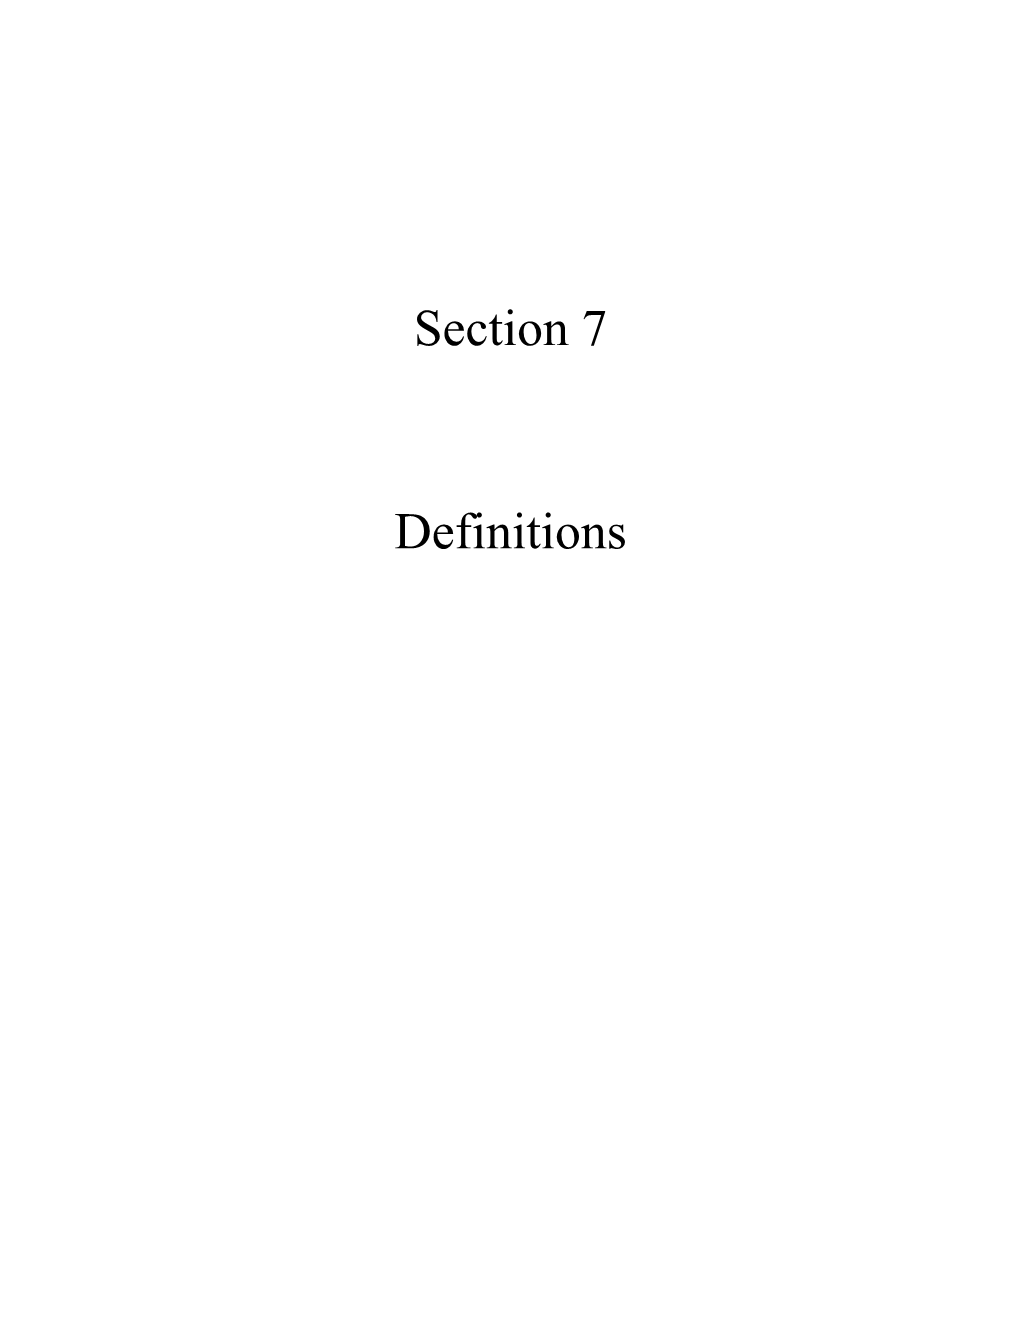 Section 7 Definitions Page 7-1 Vegetation, Drift Sills, and Other Non-Intrusive Means